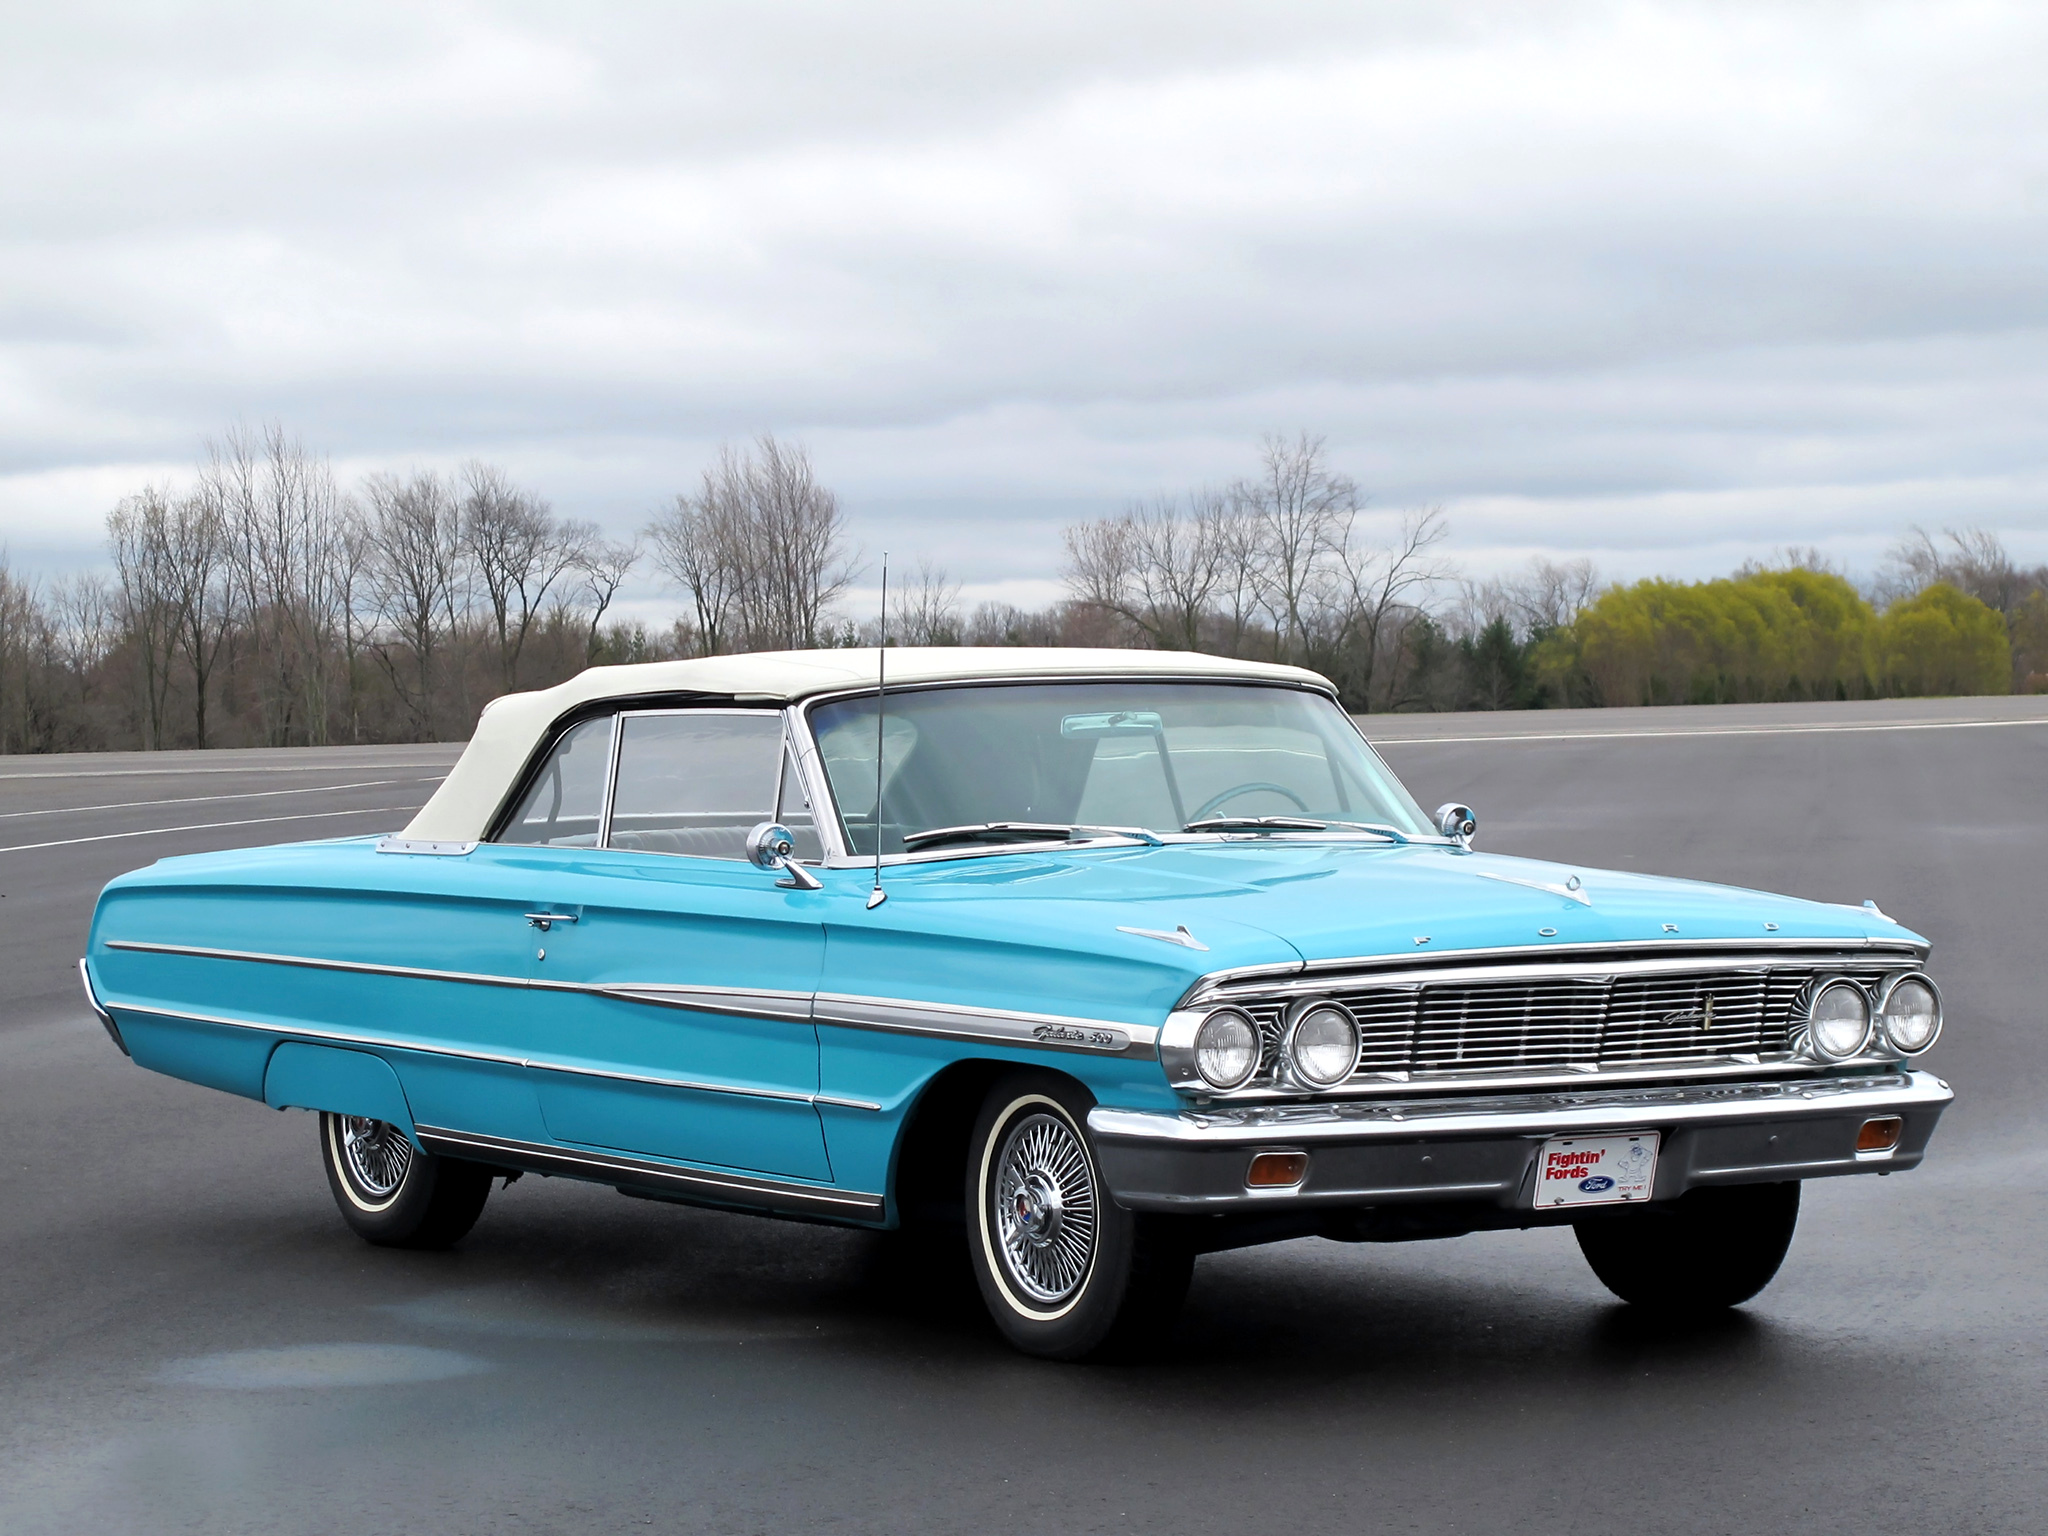 HQ Ford Galaxie 500 Wallpapers | File 914.42Kb